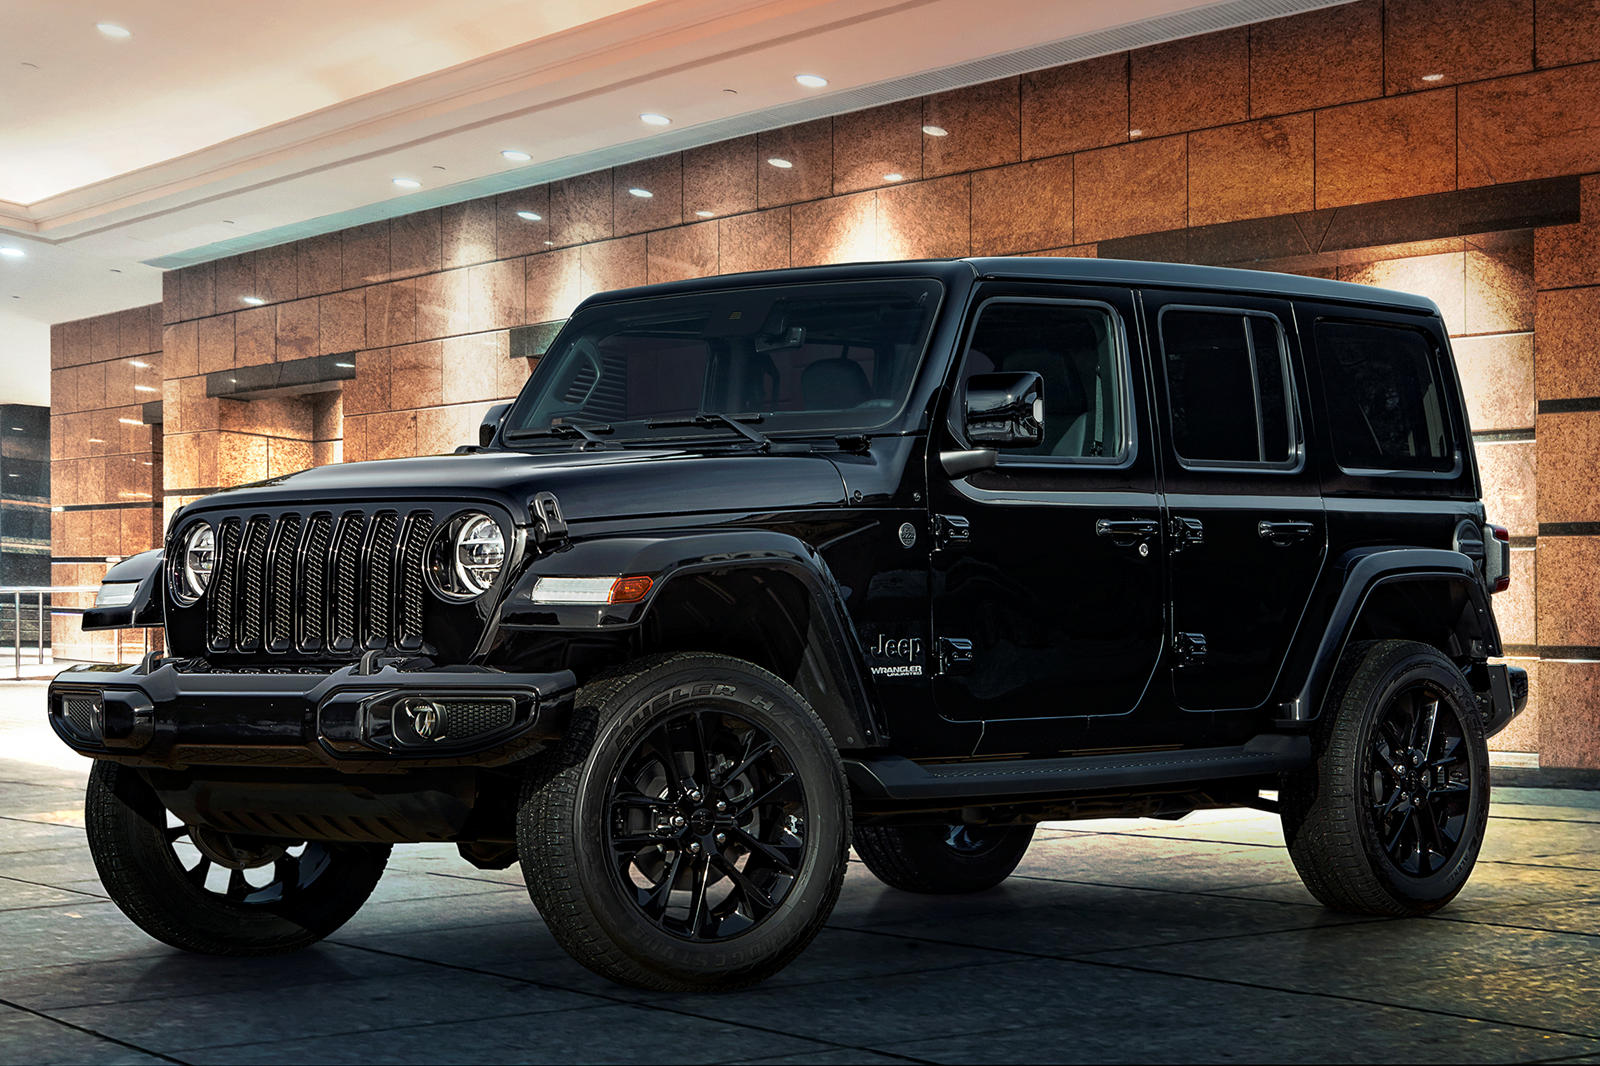 Jeep Wrangler, Gladiator Factory Two-Inch Lift Kit Introduced